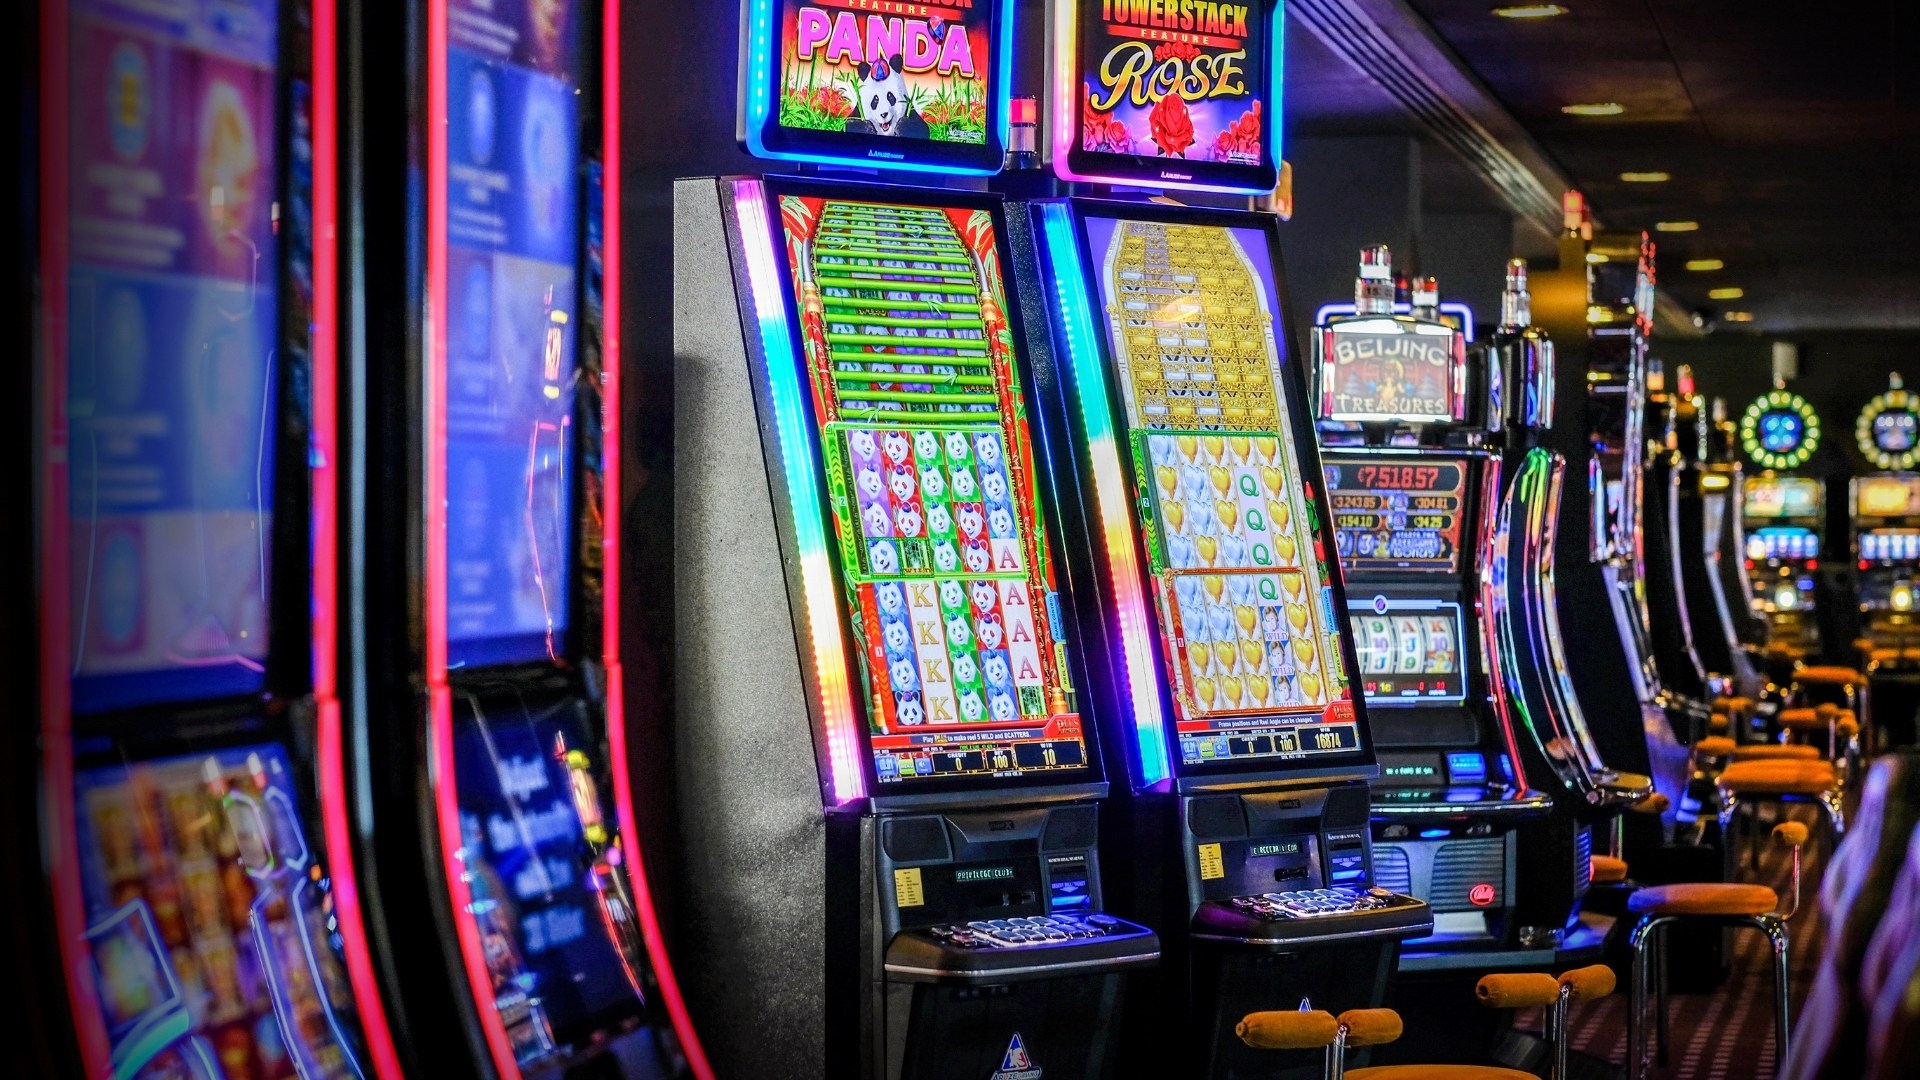 Pokies punters and taxpayers both lose when govts and industry get too cosy